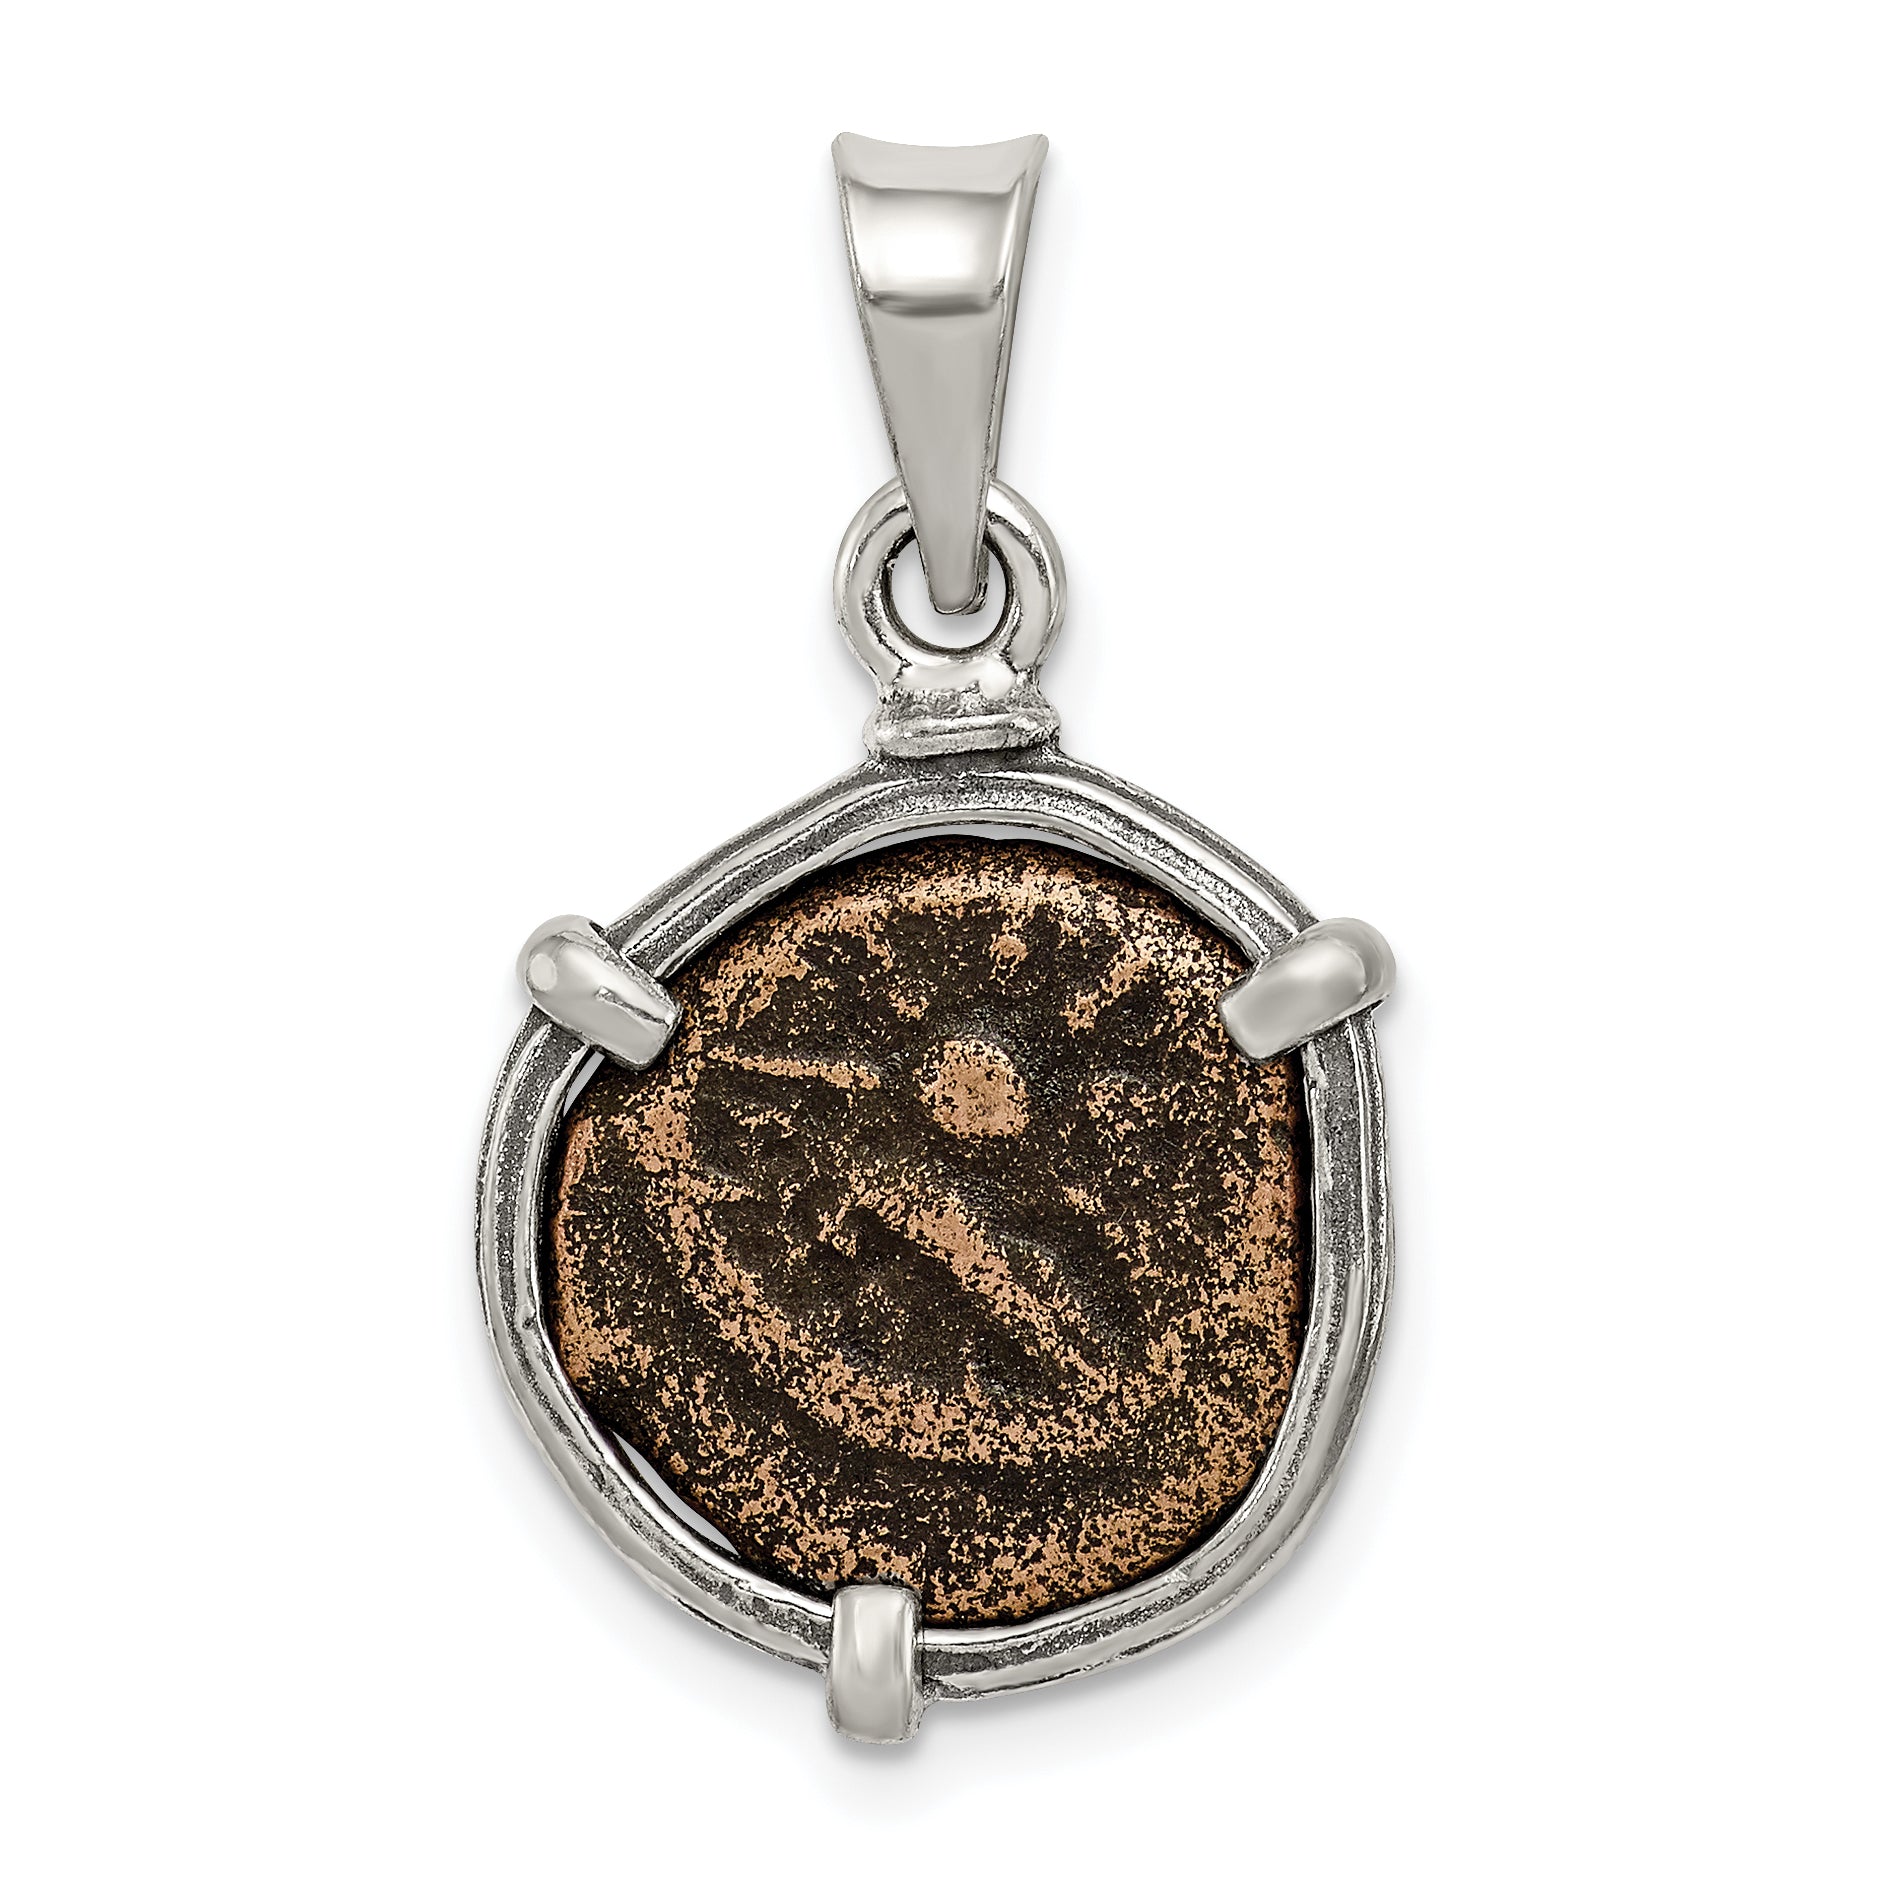 Ancient Coins Sterling Silver and Bronze Antiqued Widow's Mite Coin Pendant with a Certificate of Authenticity